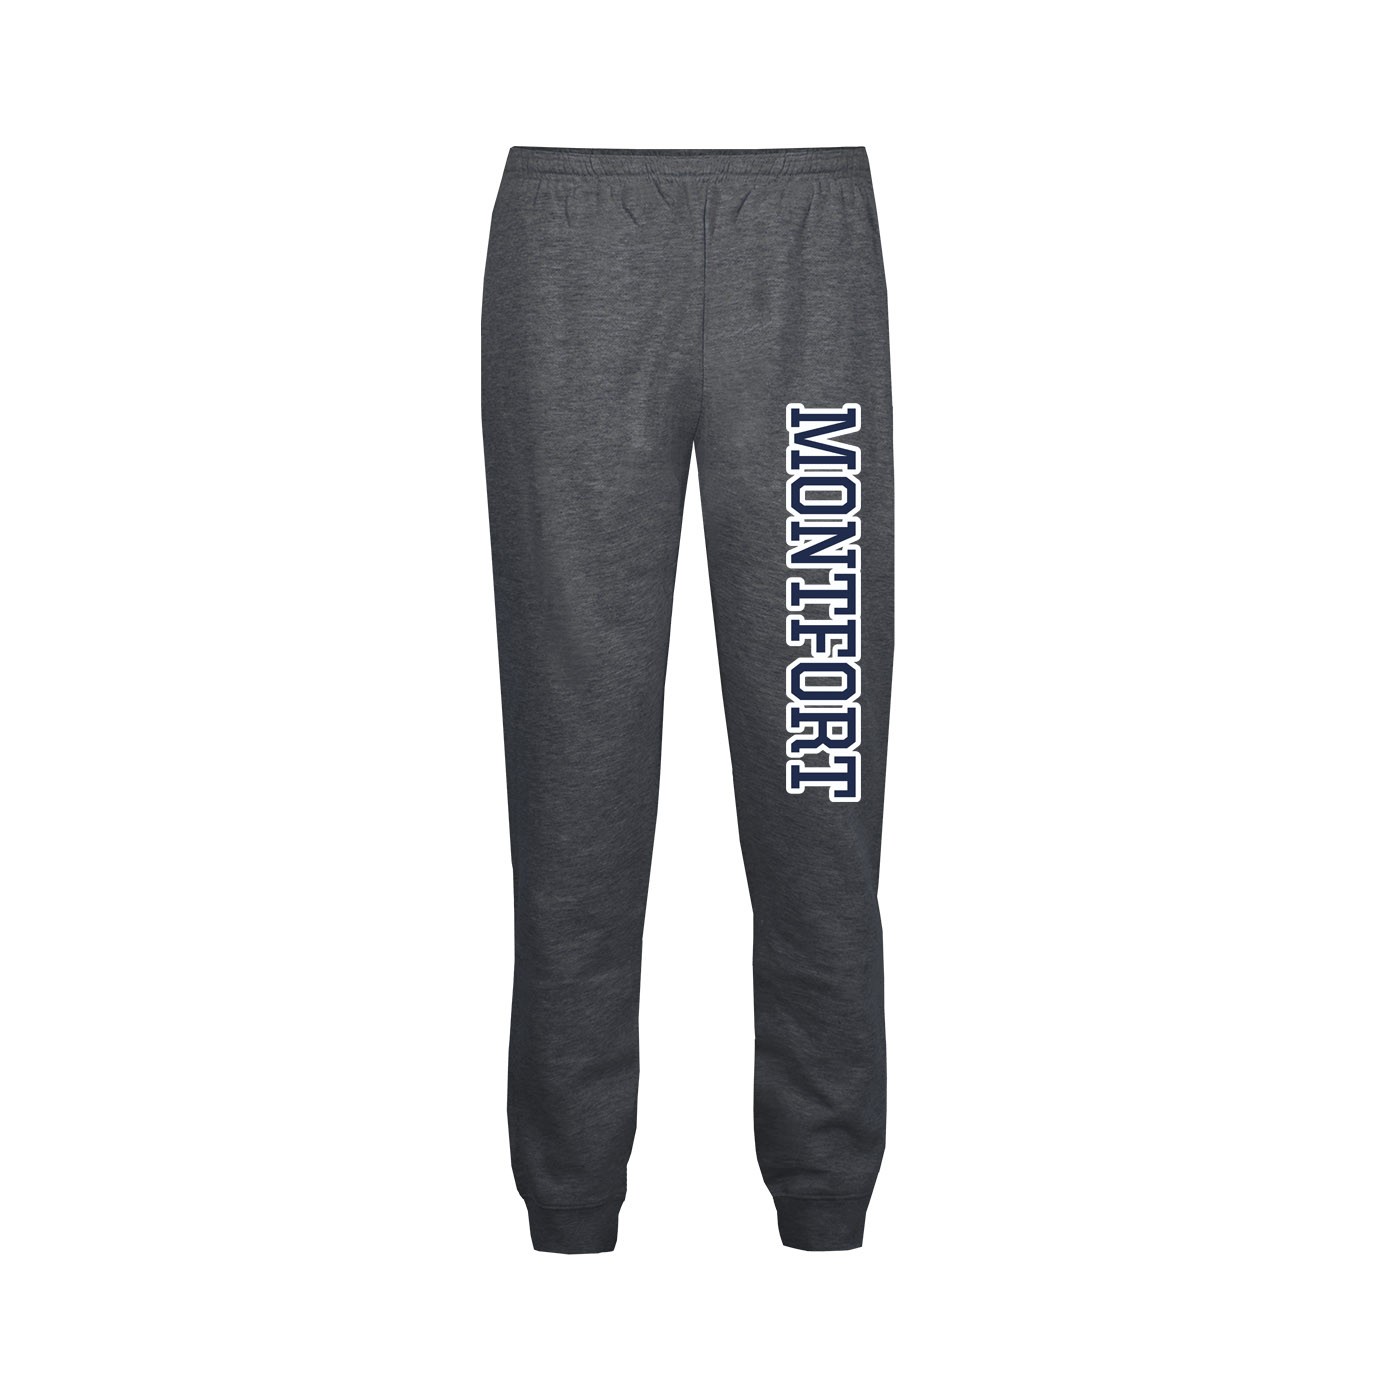 MONTFORT Spirit Performance Joggers w/ Montfort Knight Logo - Please Allow 2-3 Weeks for Delivery